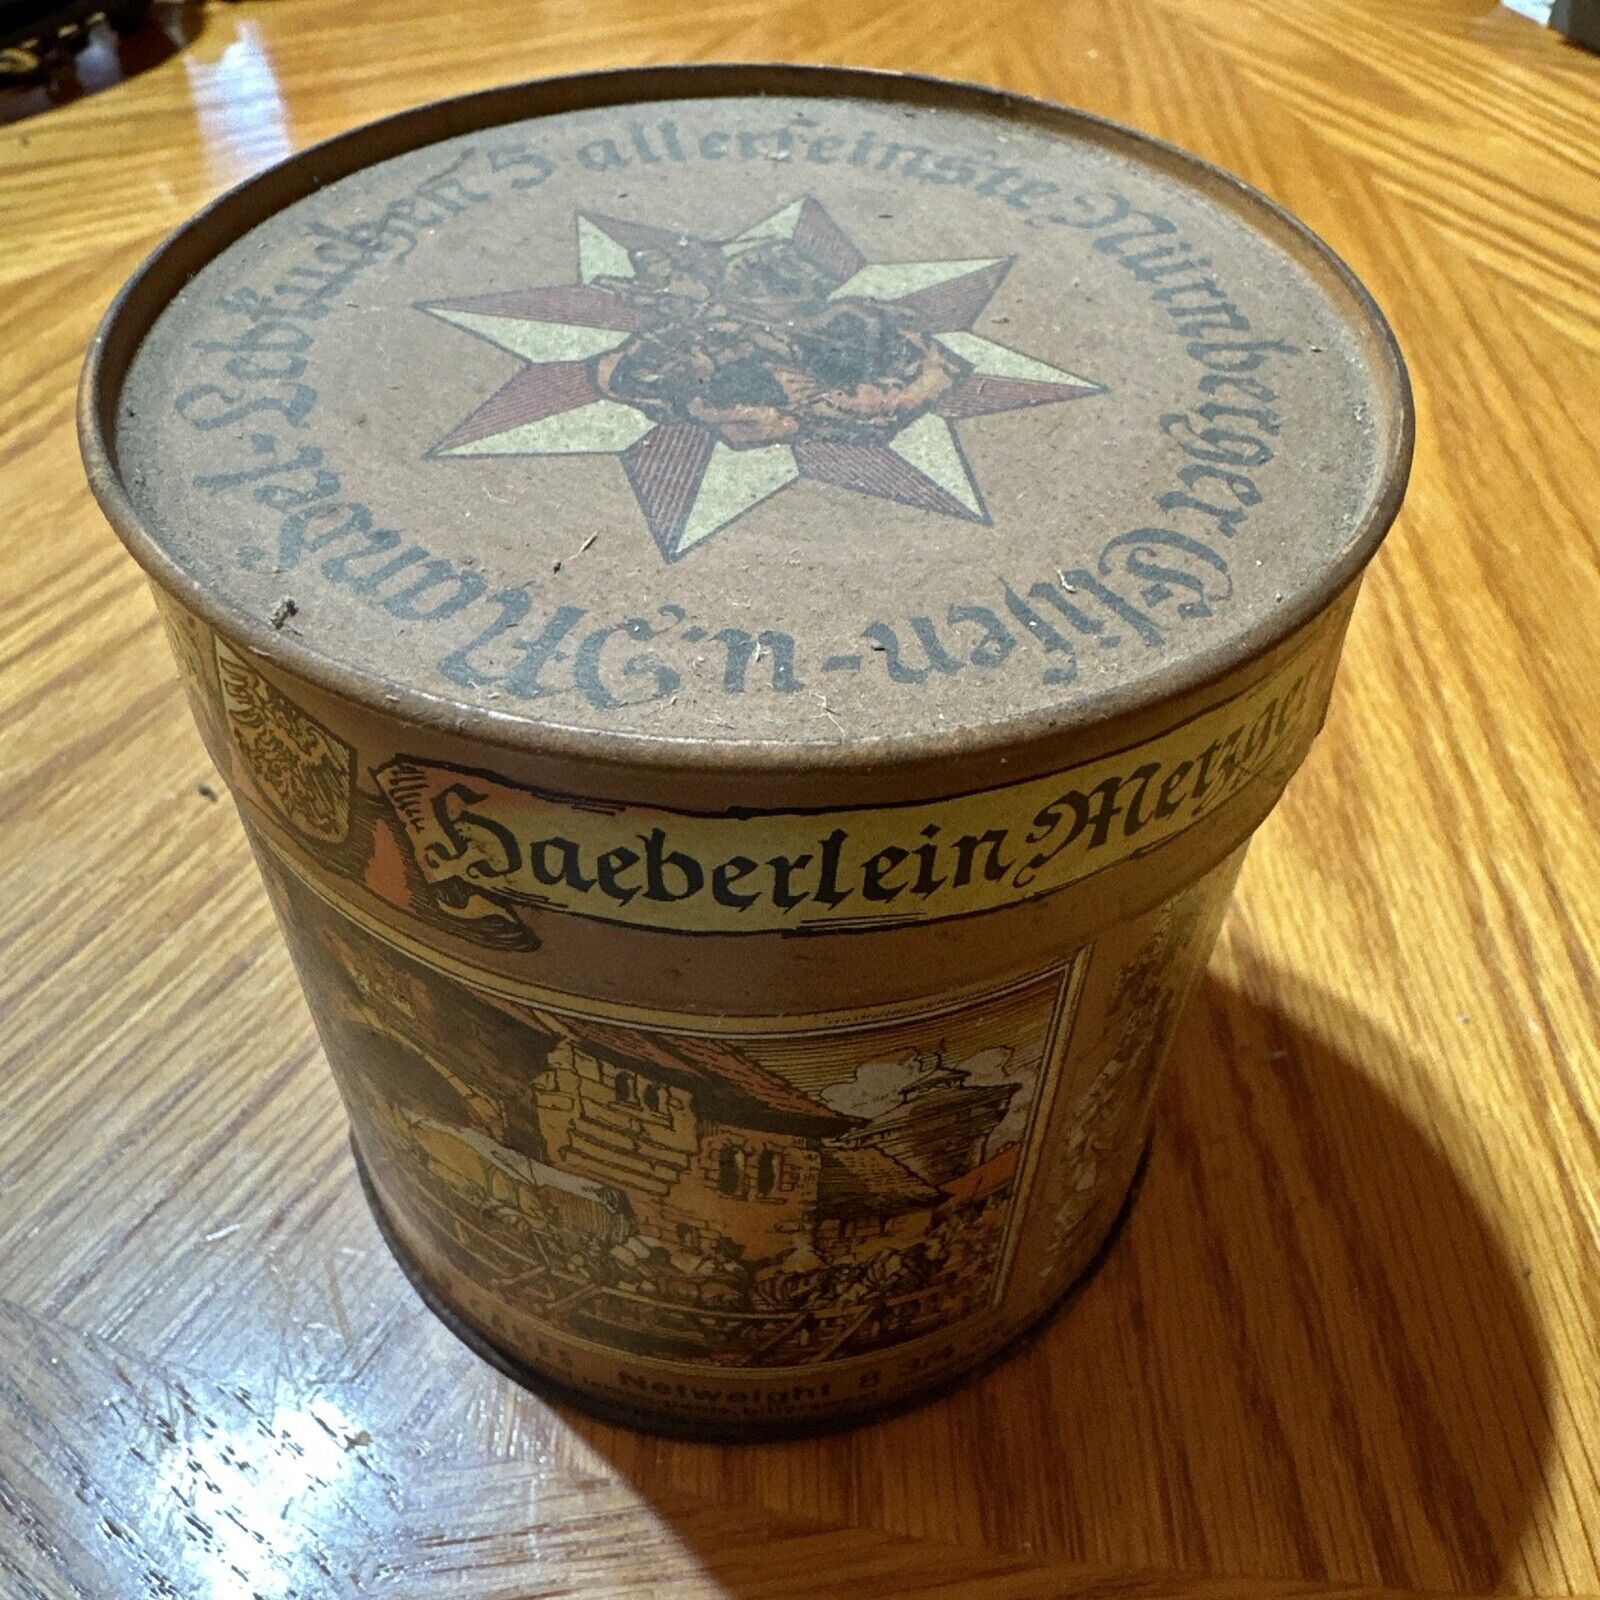 Vintage Haeberlein Metzger Spiced Cakes Empty Tin Collectible